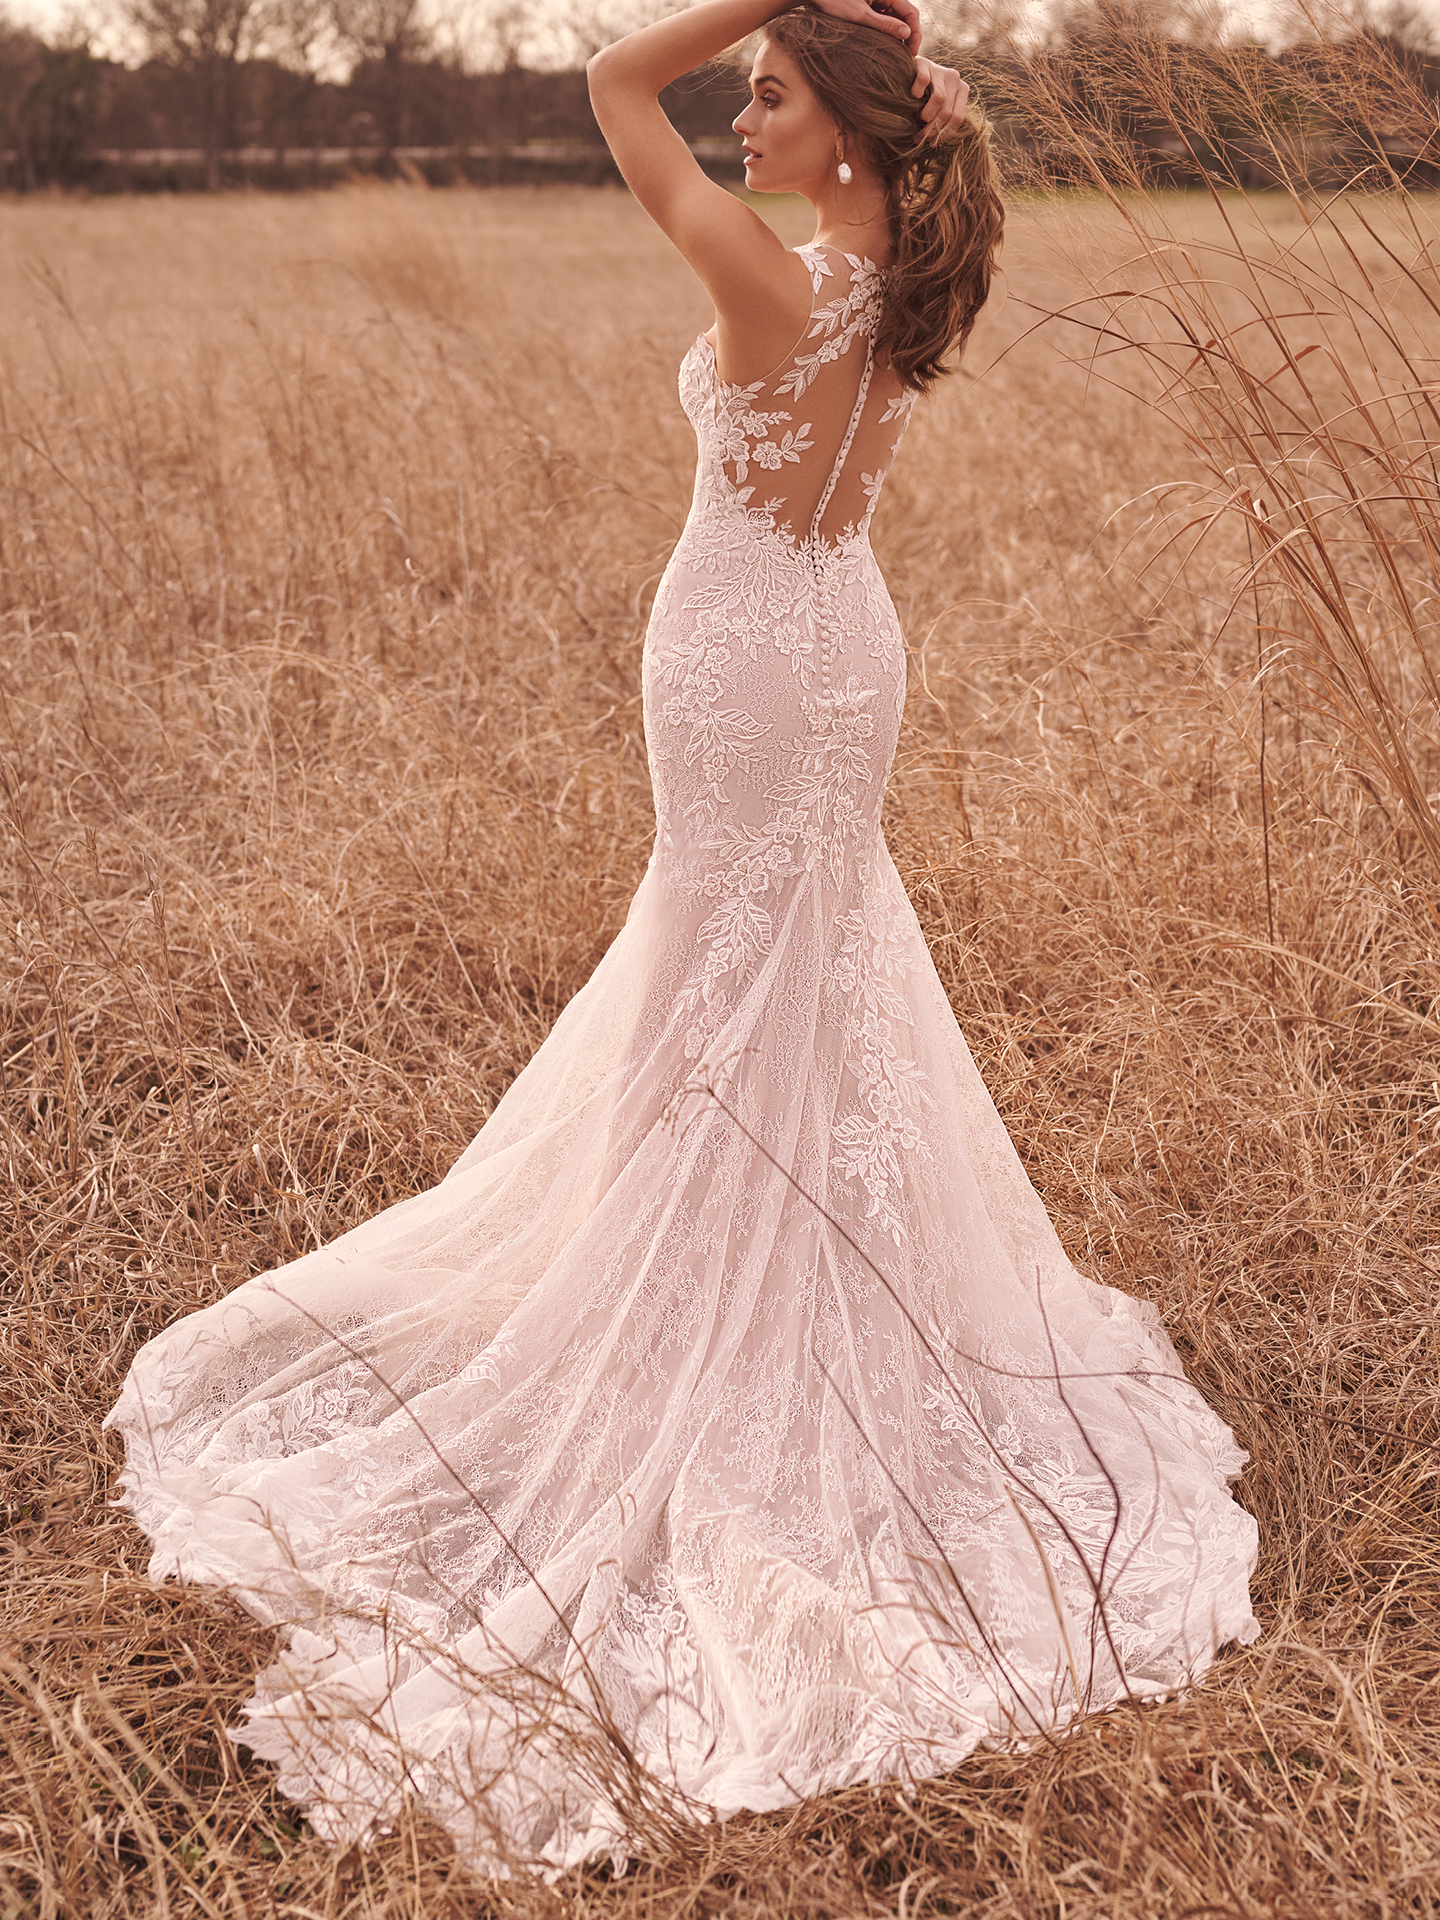 Bride Wearing Quick Delivery Wedding Dress Called Kern By Maggie Sottero